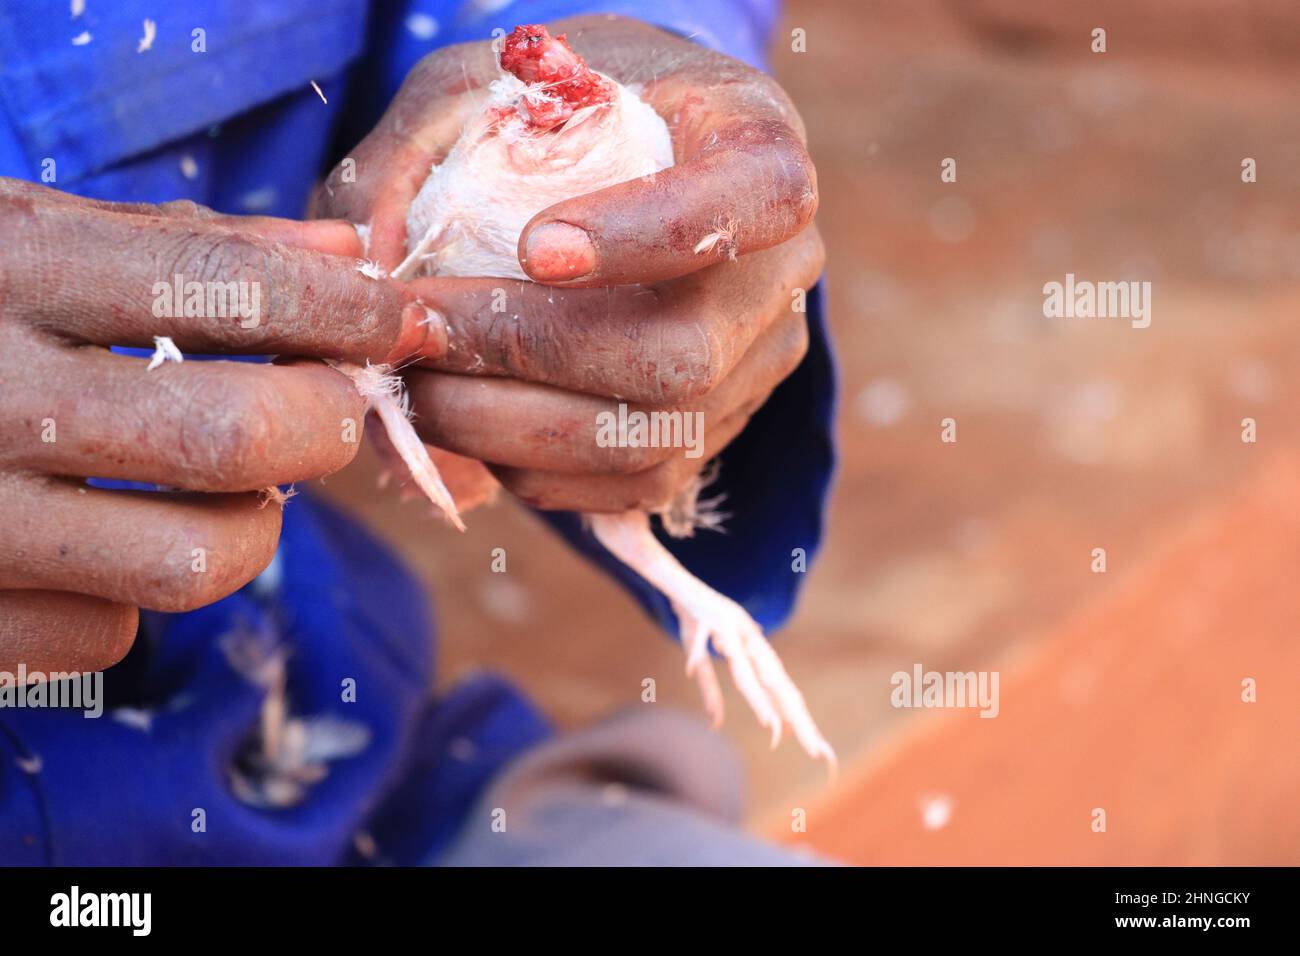 A man is seen removing feathers off a quail bird in Malingunde, Malawi. Stock Photo